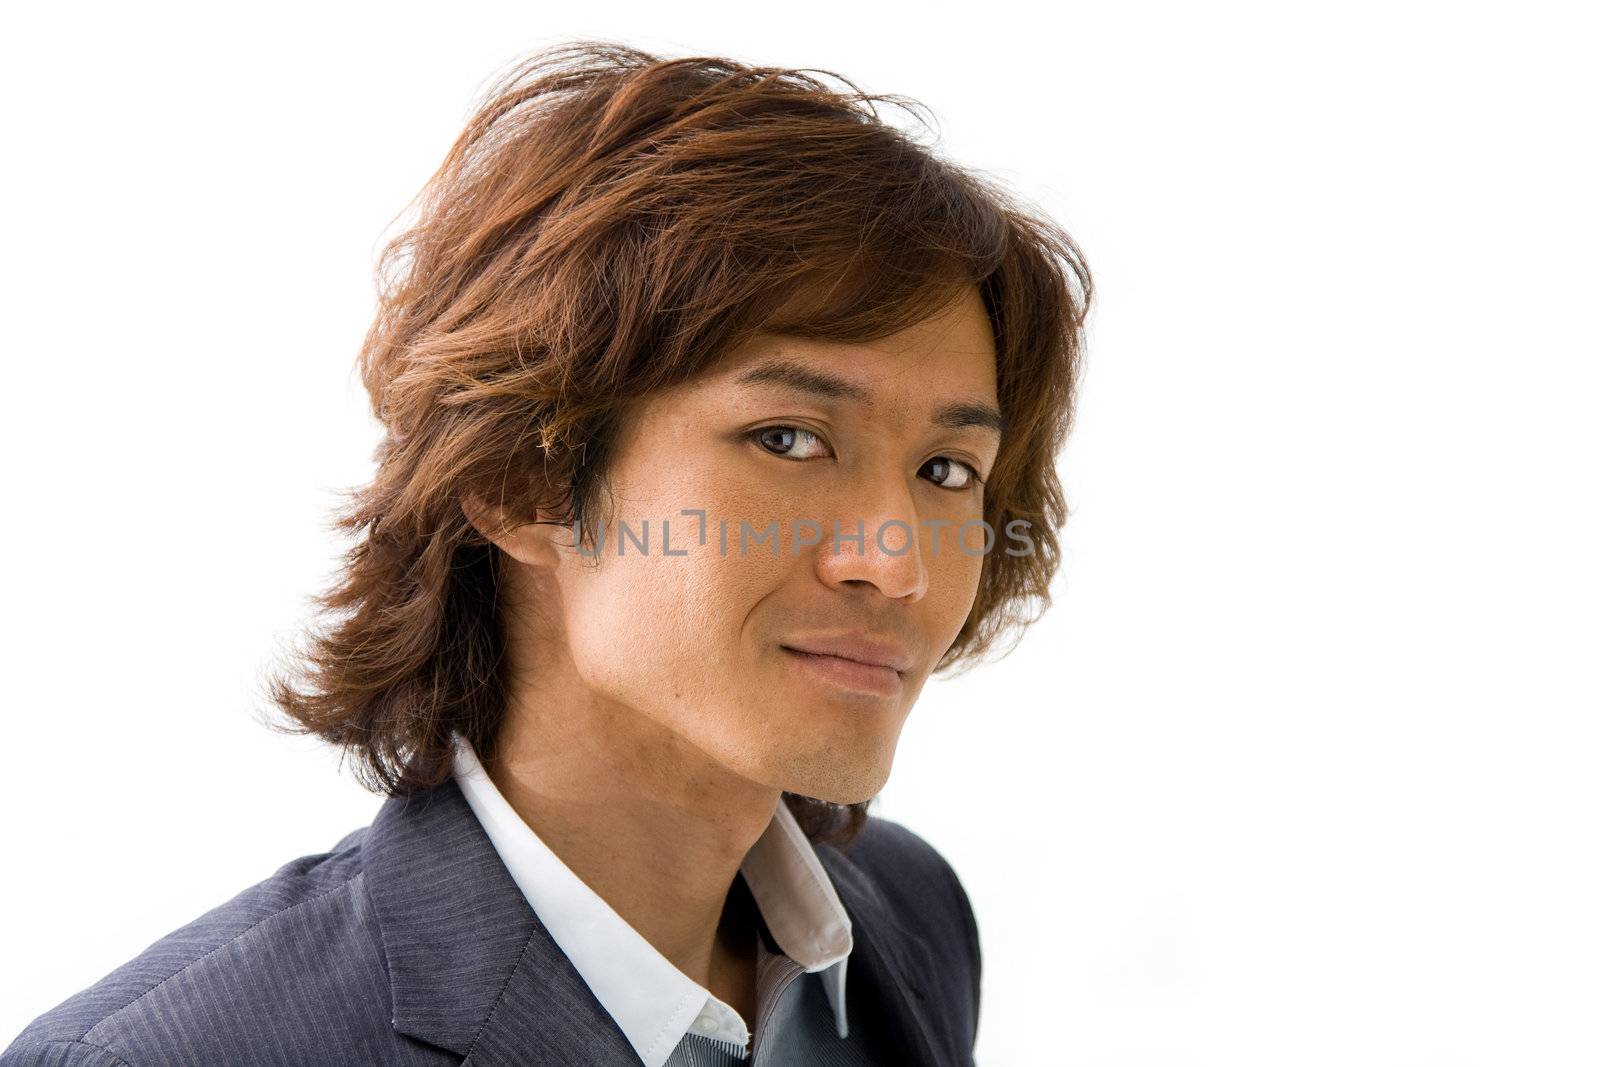 Handsome Asian guy's face with a smile, isolated